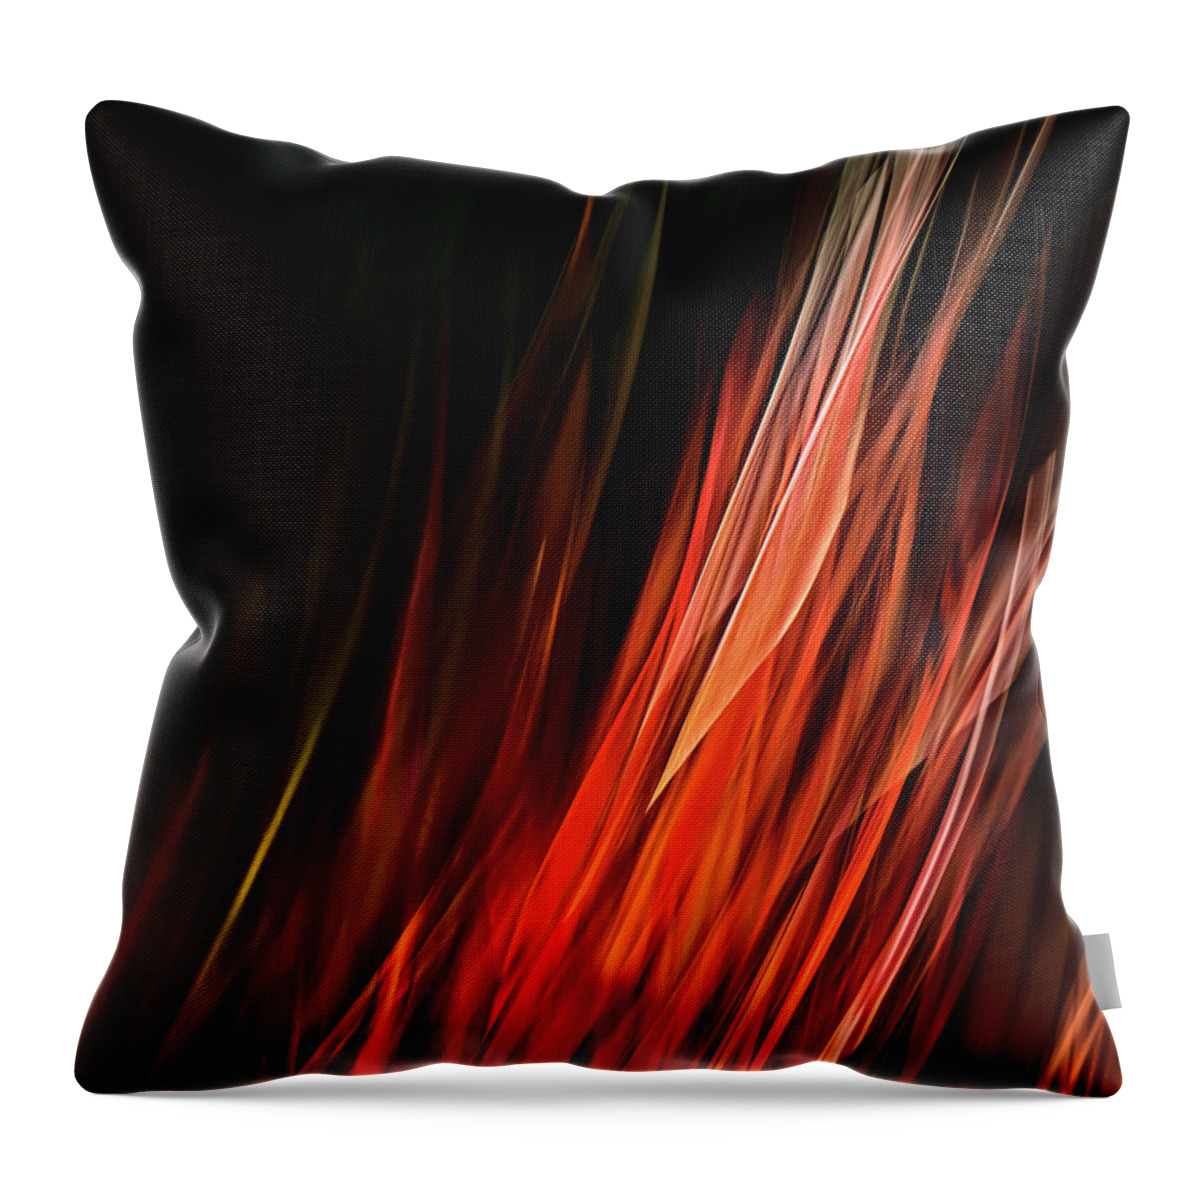 Miscanthus 'purpurascens' Throw Pillow featuring the photograph Flame Grass by Theresa Tahara